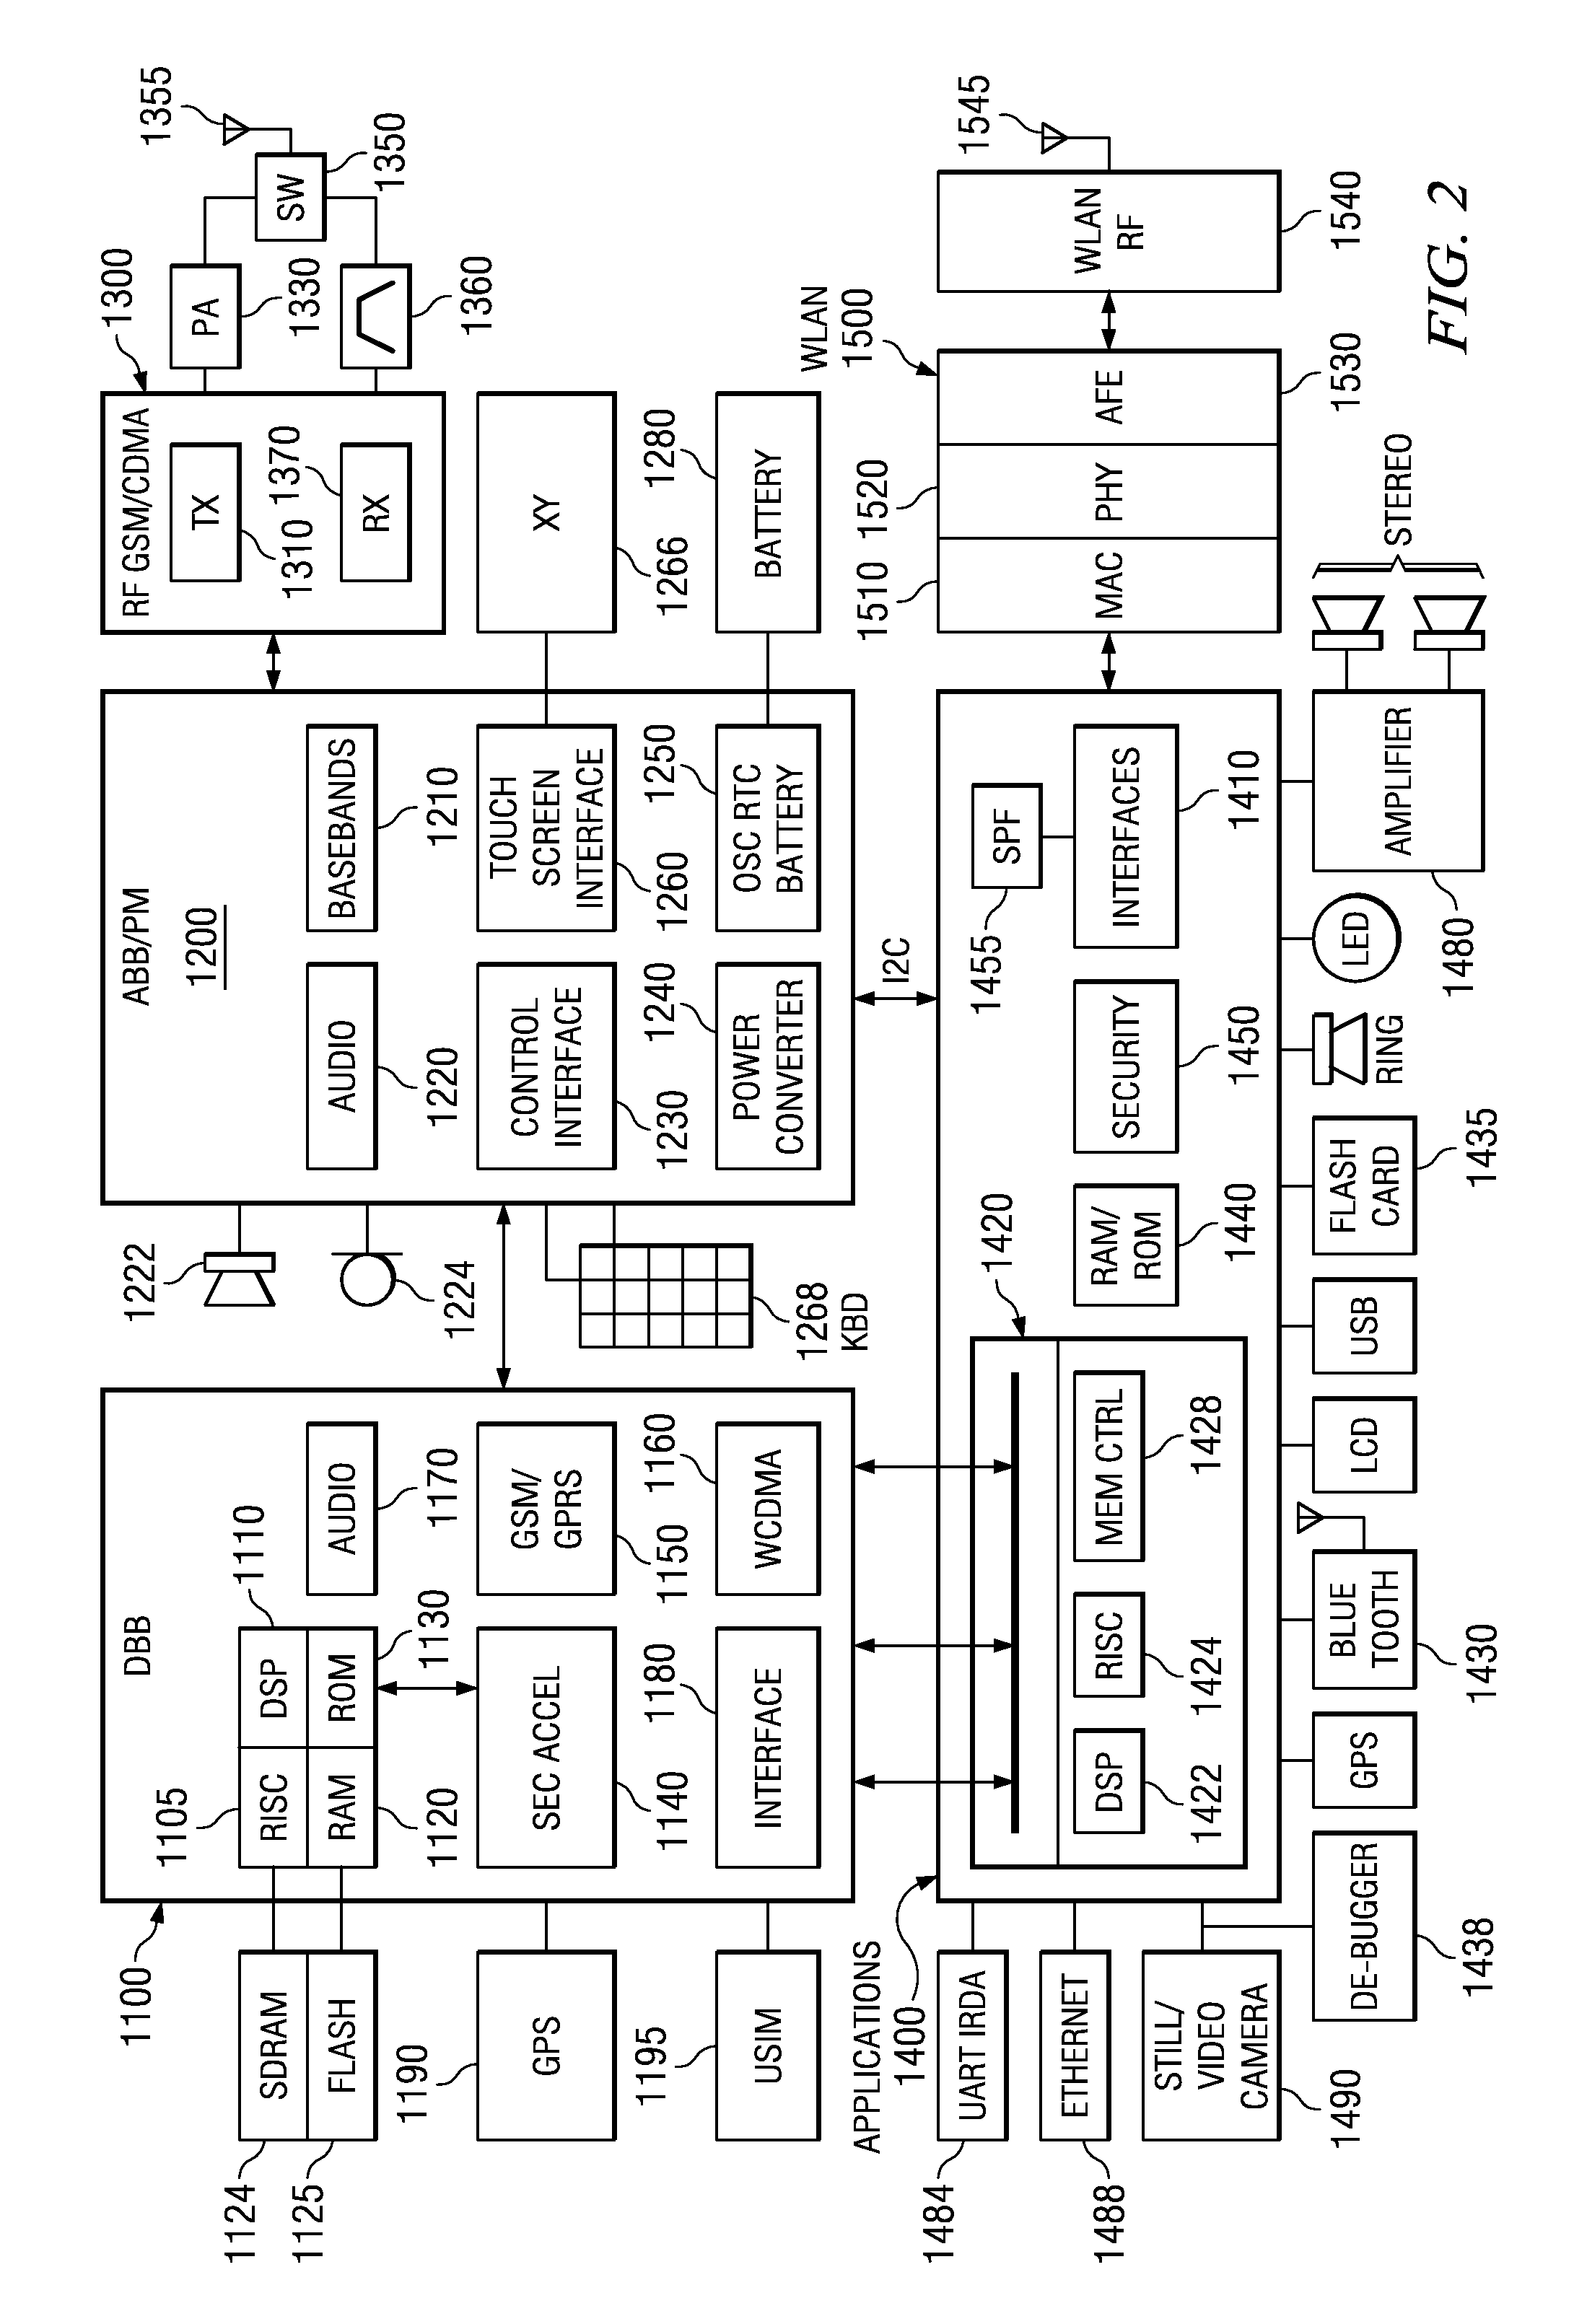 Packet processors and packet filter processes, circuits, devices, and systems